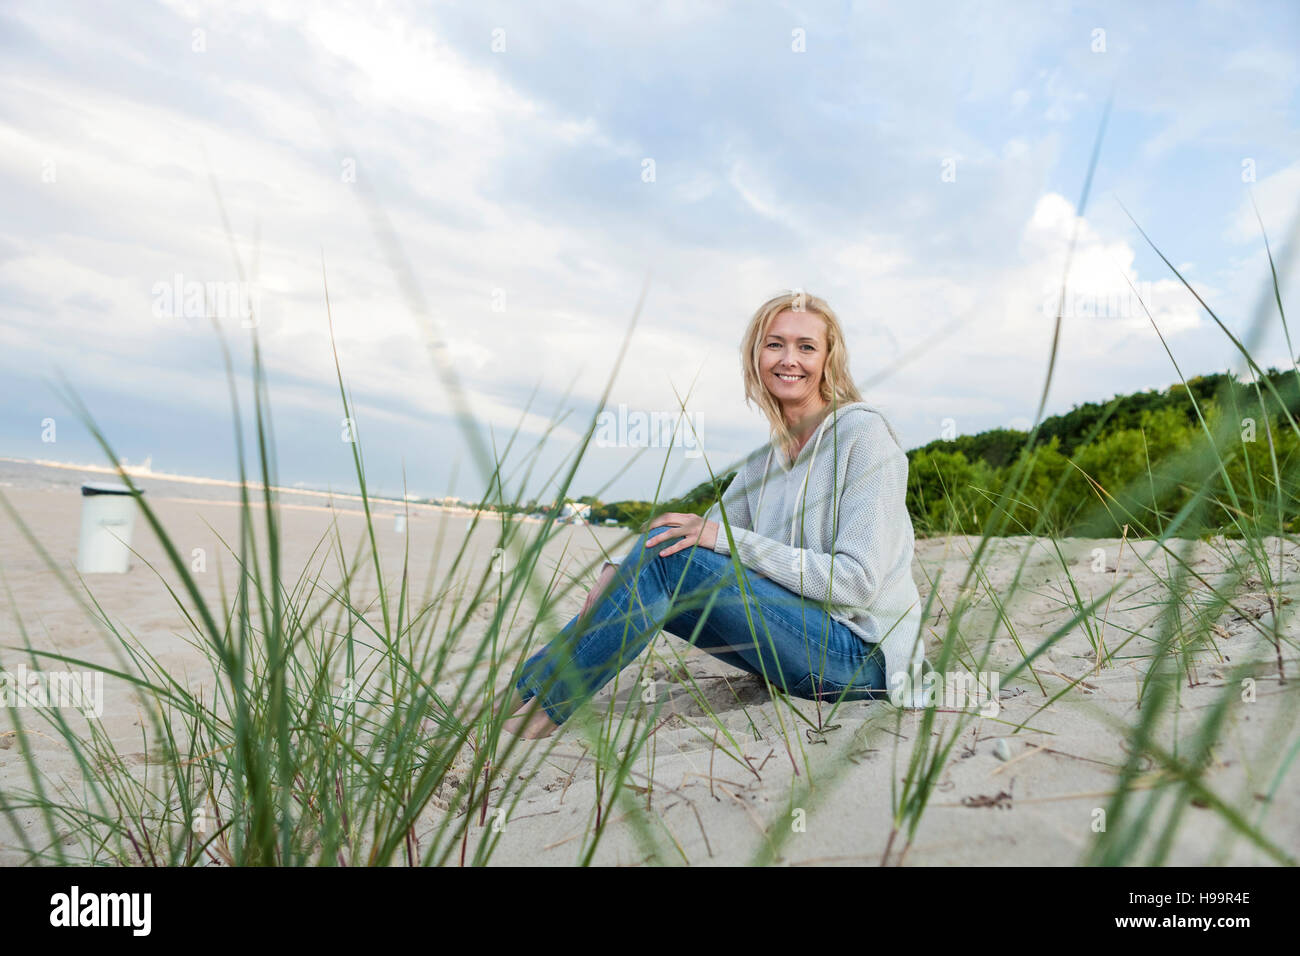 Woman with blond hair relaxing on sandy beach Stock Photo